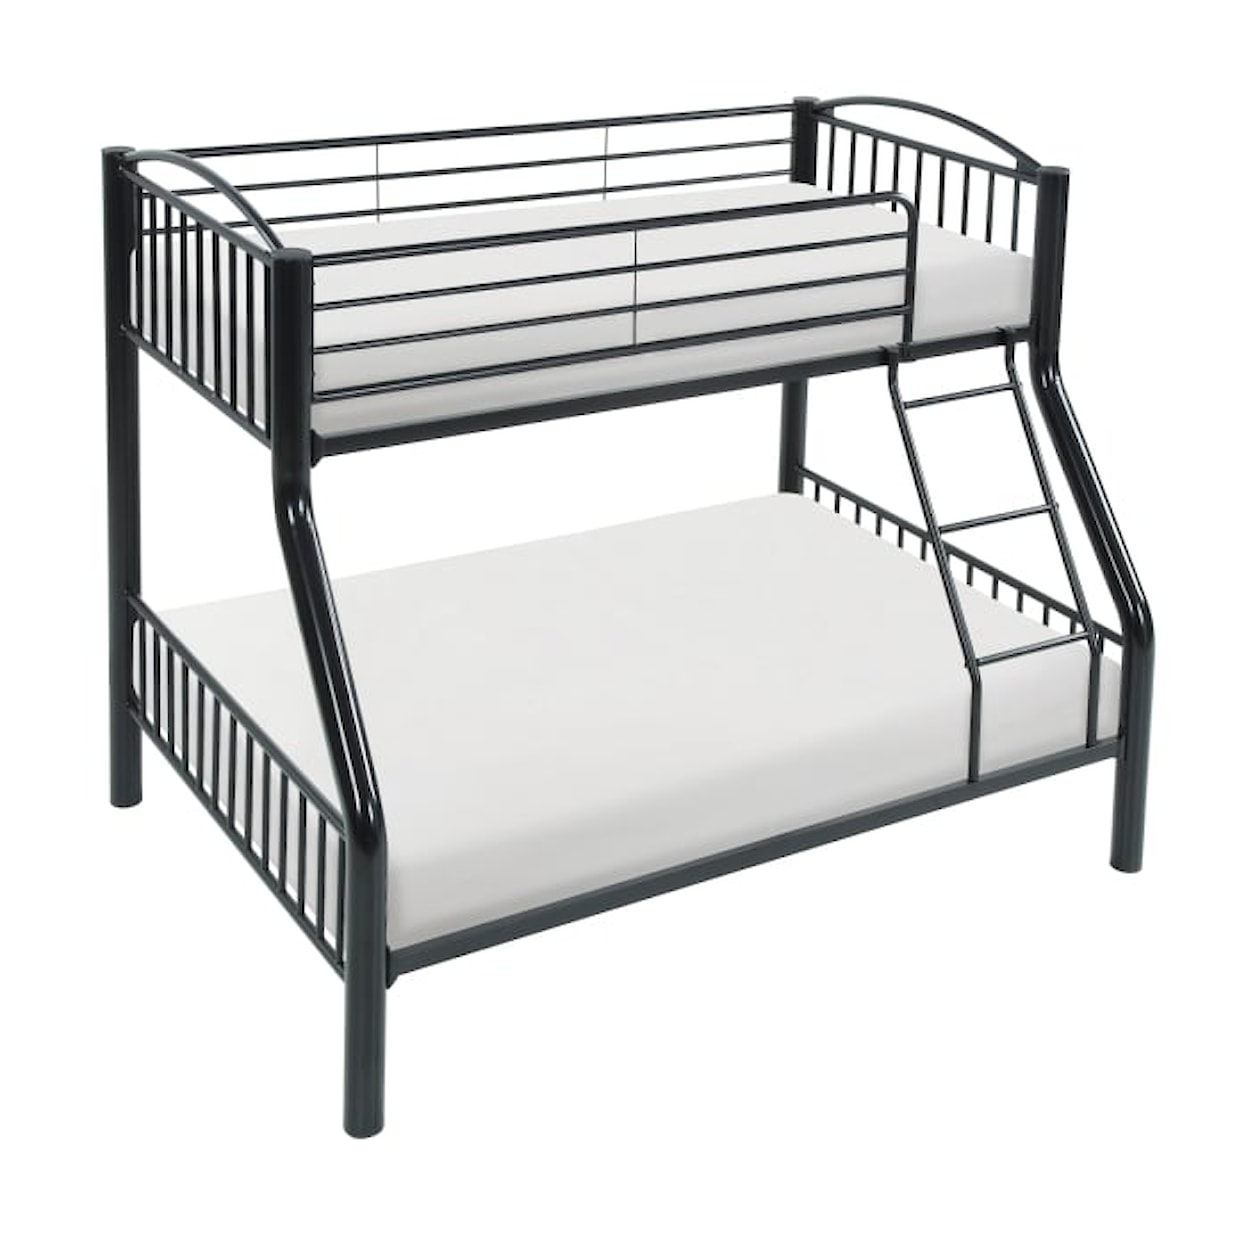 Homelegance Furniture Miscellaneous Twin/Full Bunk Bed